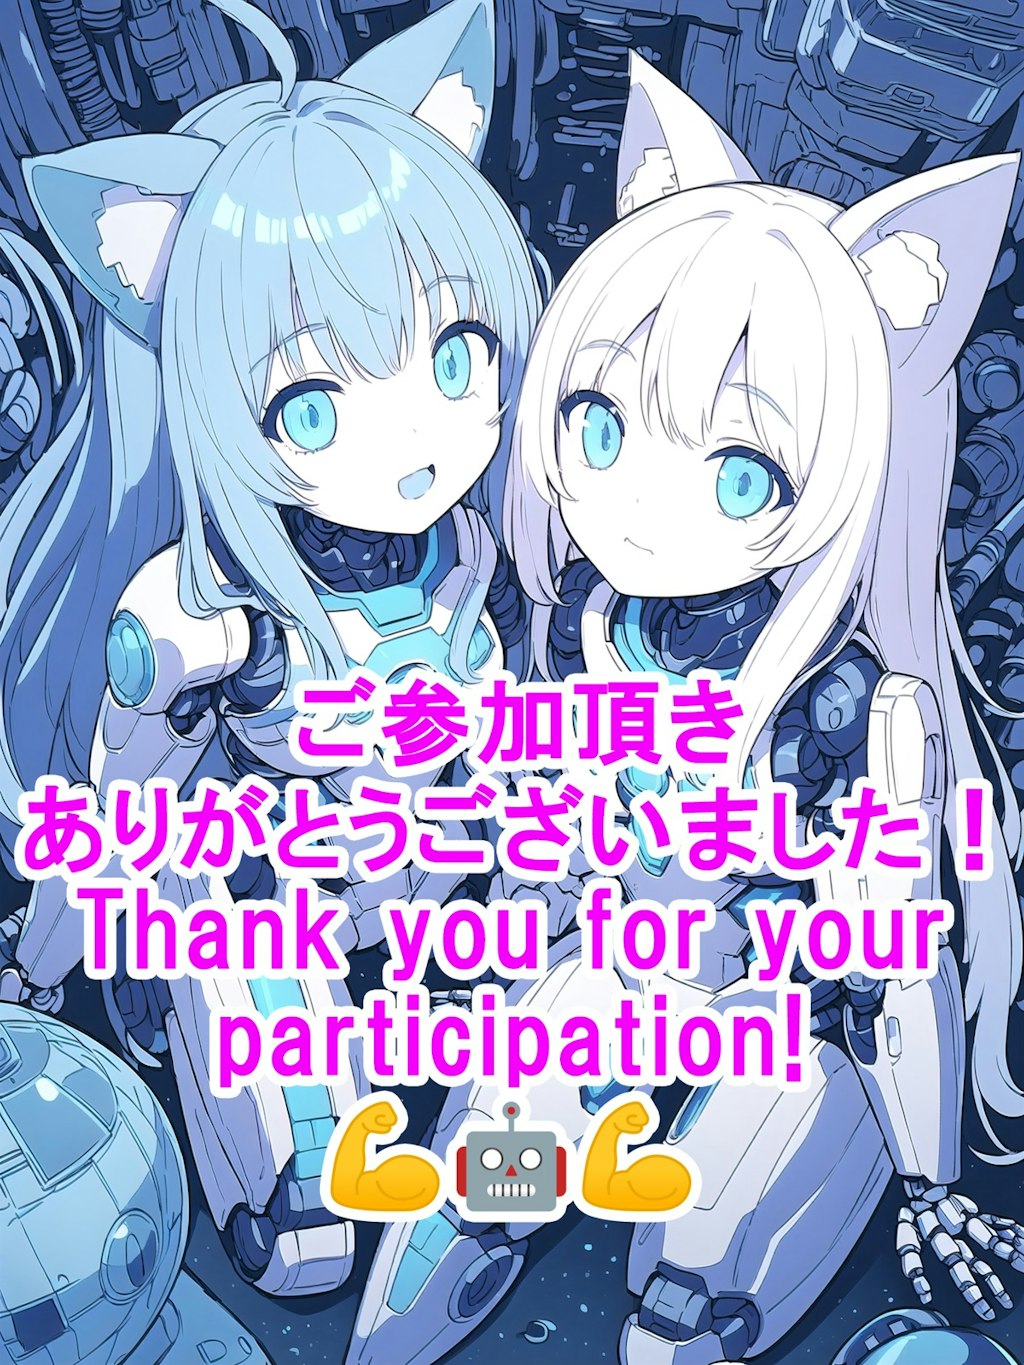 Thank you for your participation!!